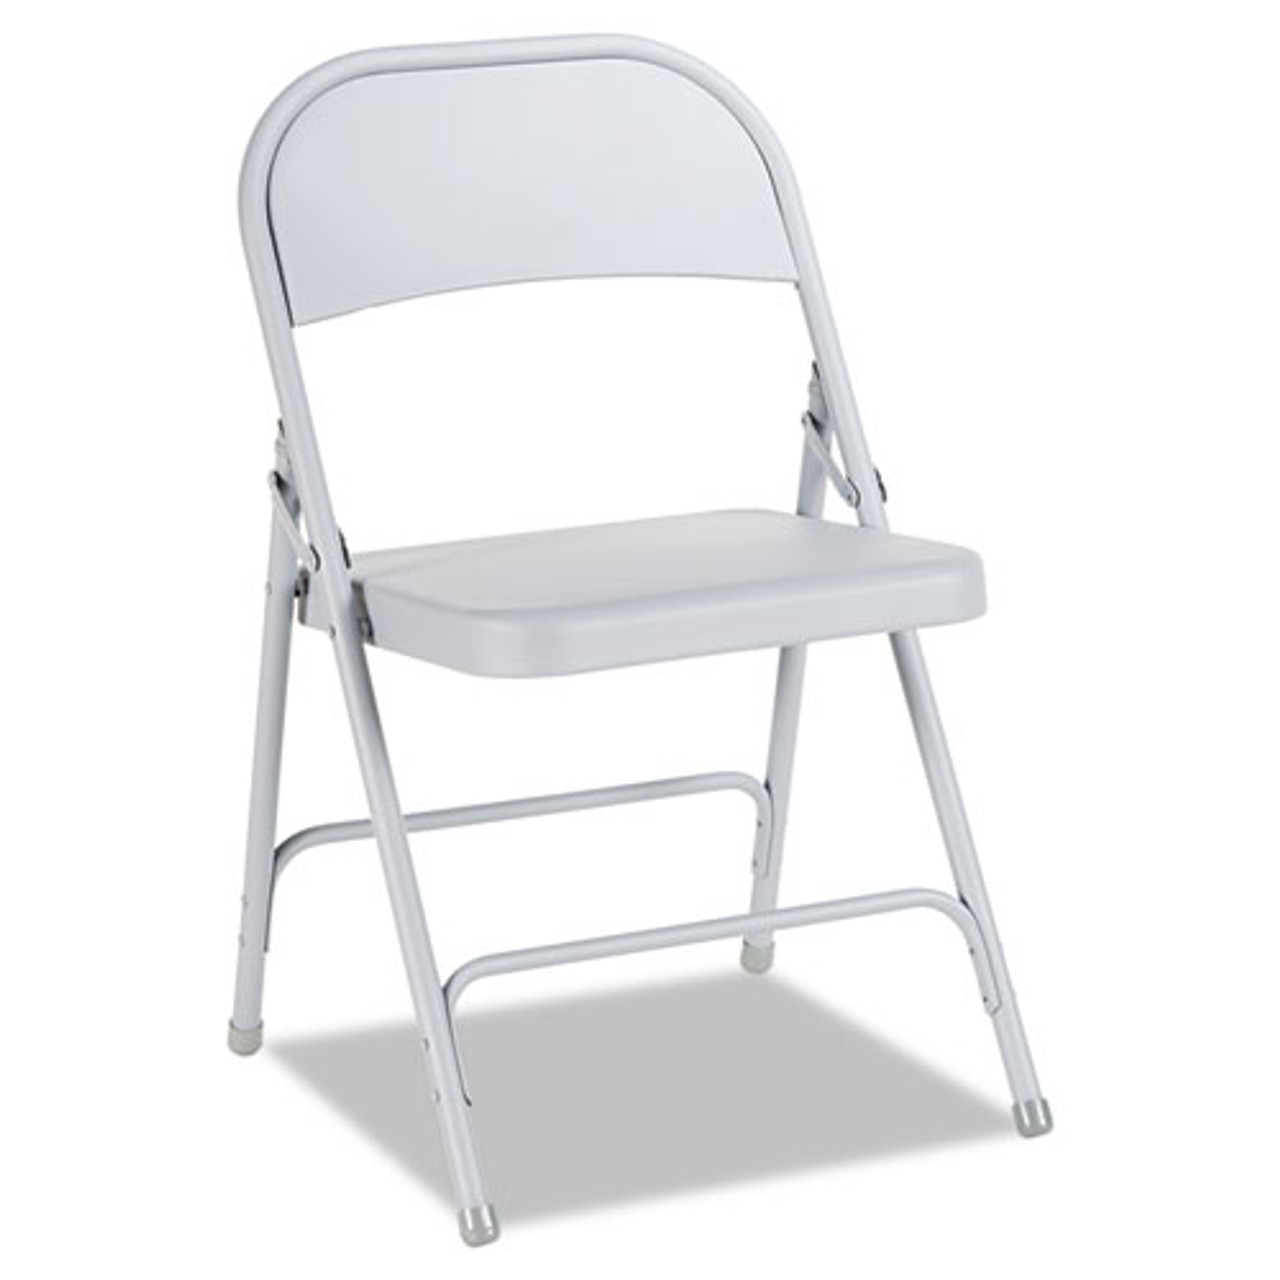 Steel Folding Chair With Two-Brace Support, Light Gray, 4/carton, #AL-1238